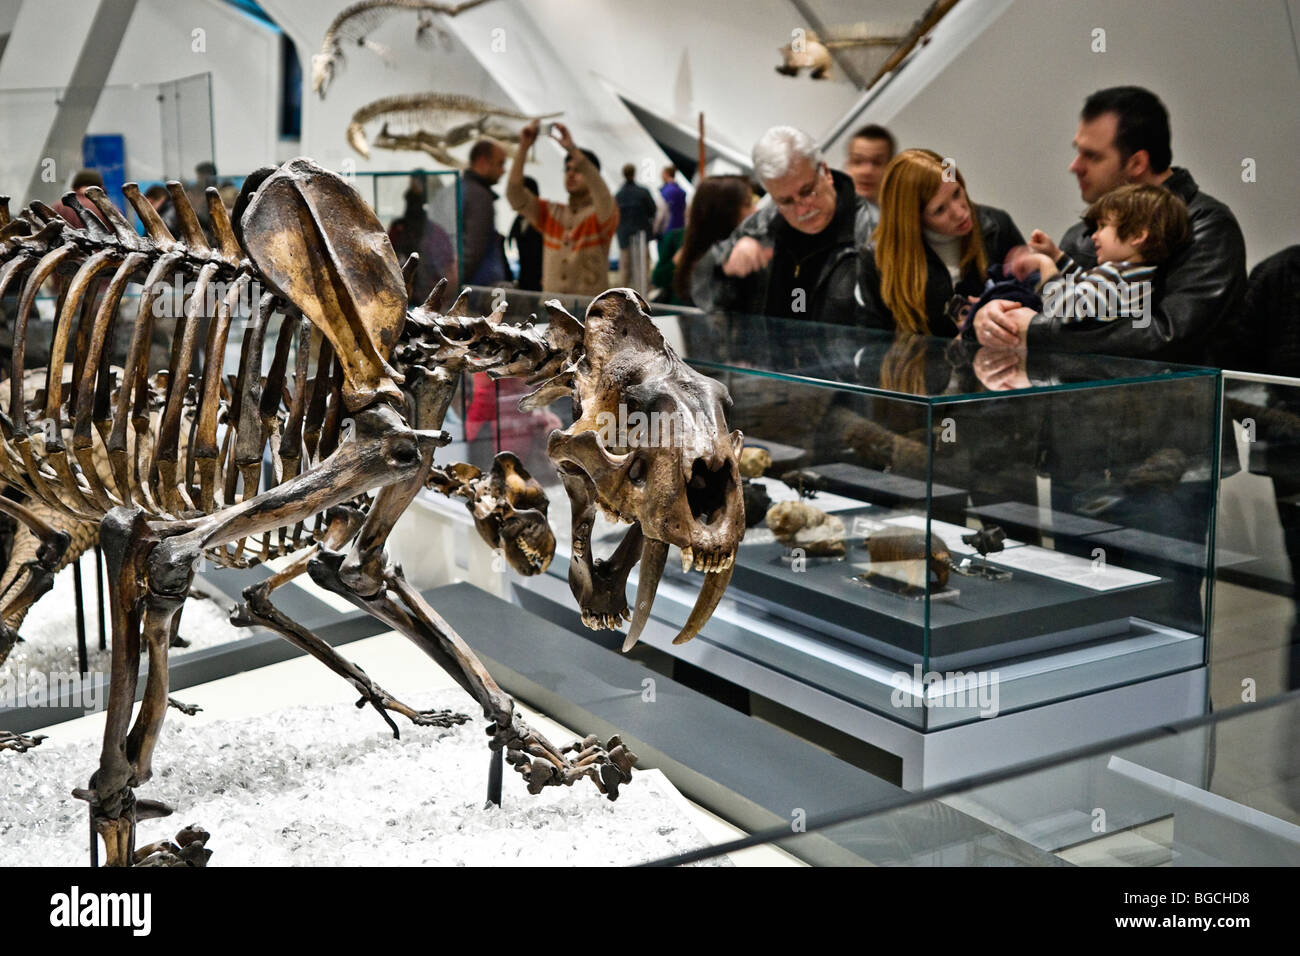 Family with a child (boy) looking at dinosaur fossils at the Royal Ontario Museum, people all around them Stock Photo